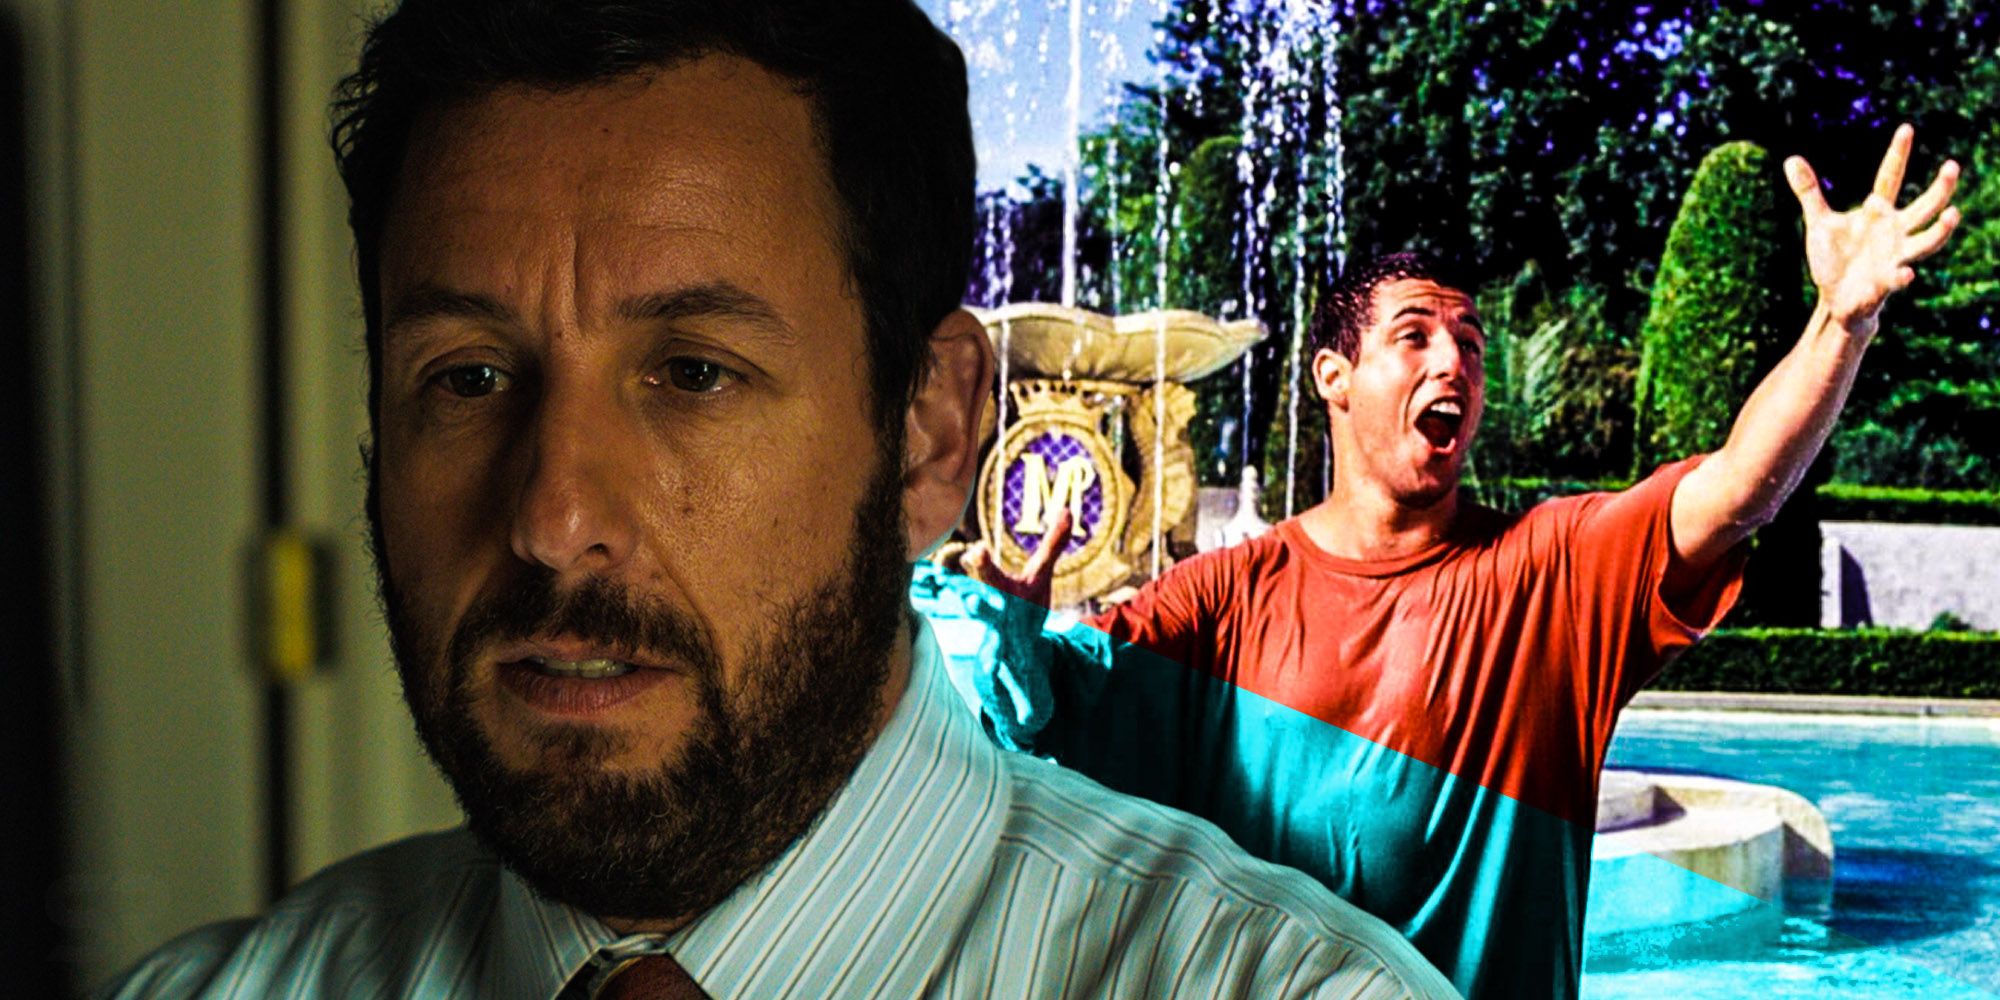 Why Adam Sandlers Next Movie Role Needs To Be A Villain